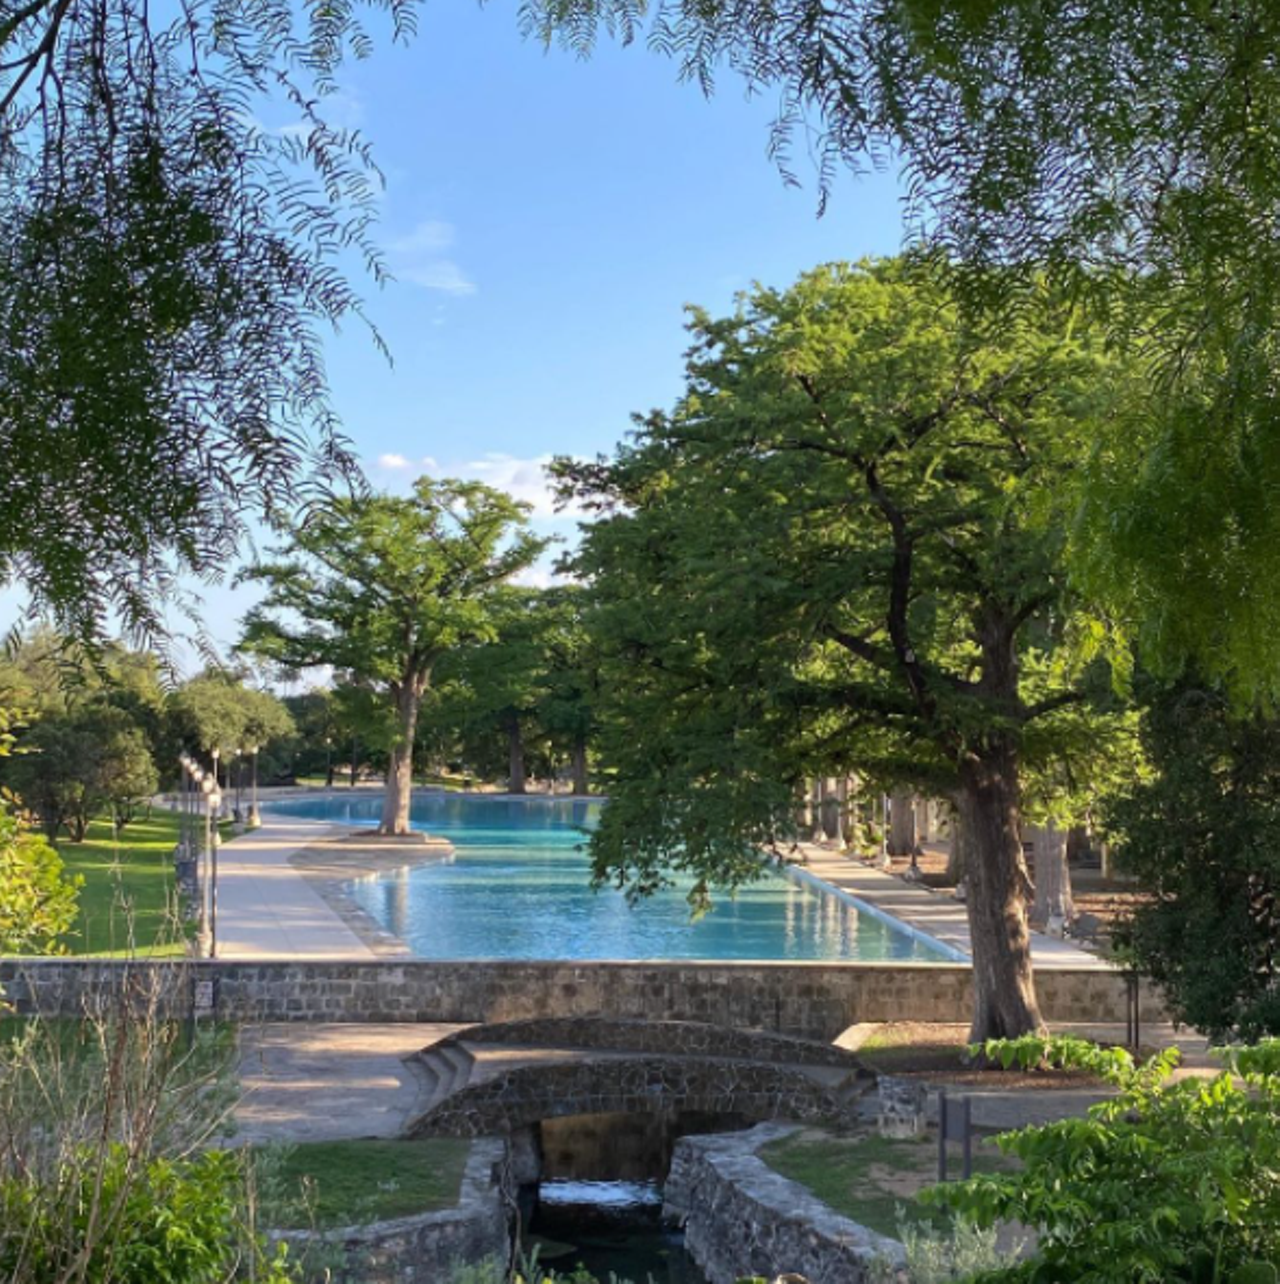 San Pedro Springs
2200 N. Flores, (210) 732-5992, sanantonio.gov
Looking to spend a day in the poolside shade at a history-filled park smack-dab in the middle of San Antonio? Look no further than San Pedro Springs. The 46-acre park dates back to the eighteenth century, making it the second-oldest public park in the country, behind the Boston Commons. The spring-fed pool was built as a part of the park’s overall renovation in 1915-20, replacing what was once a lake bed. Entered into the National Register of Historic Places in 1979, a day at San Pedro Springs is a day spent at a park officially worthy of preservation.
Photo via Instagram / caroleckelkamp